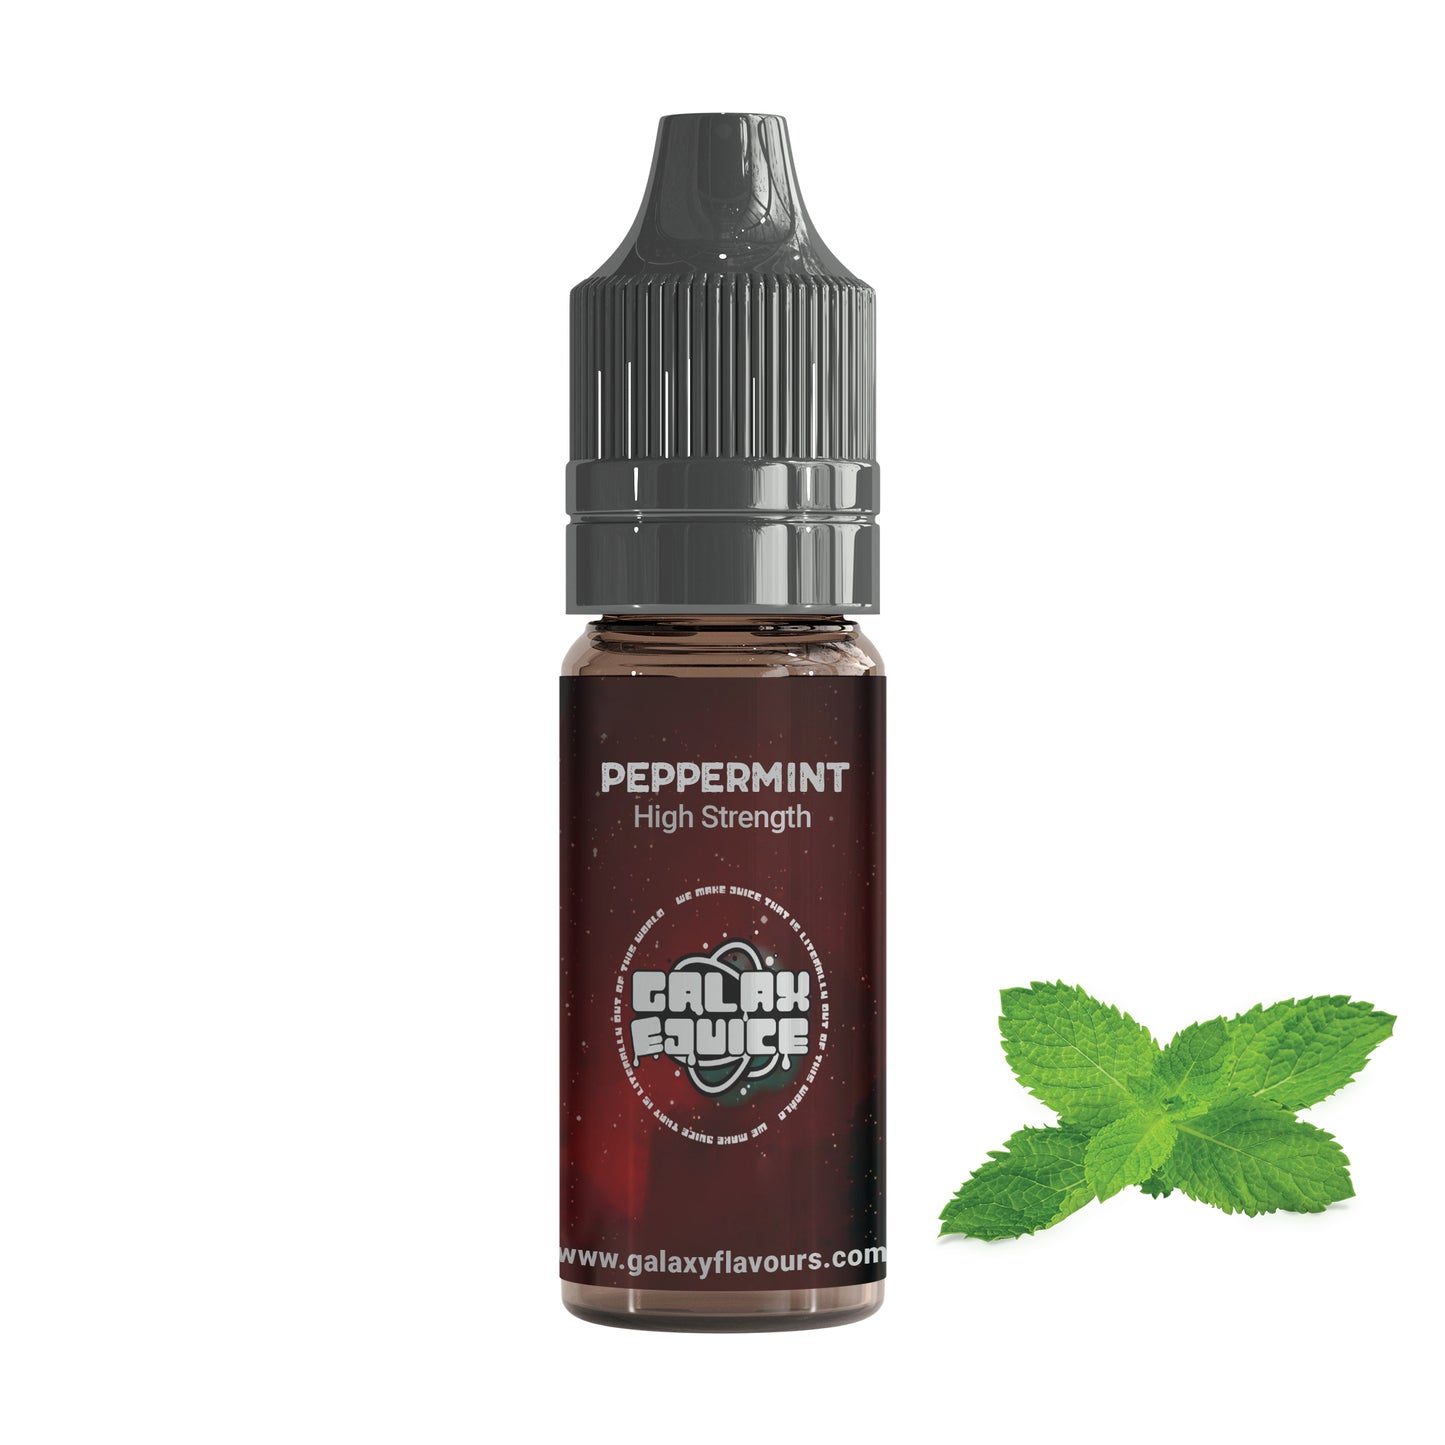 Peppermint High Strength Professional Flavouring.